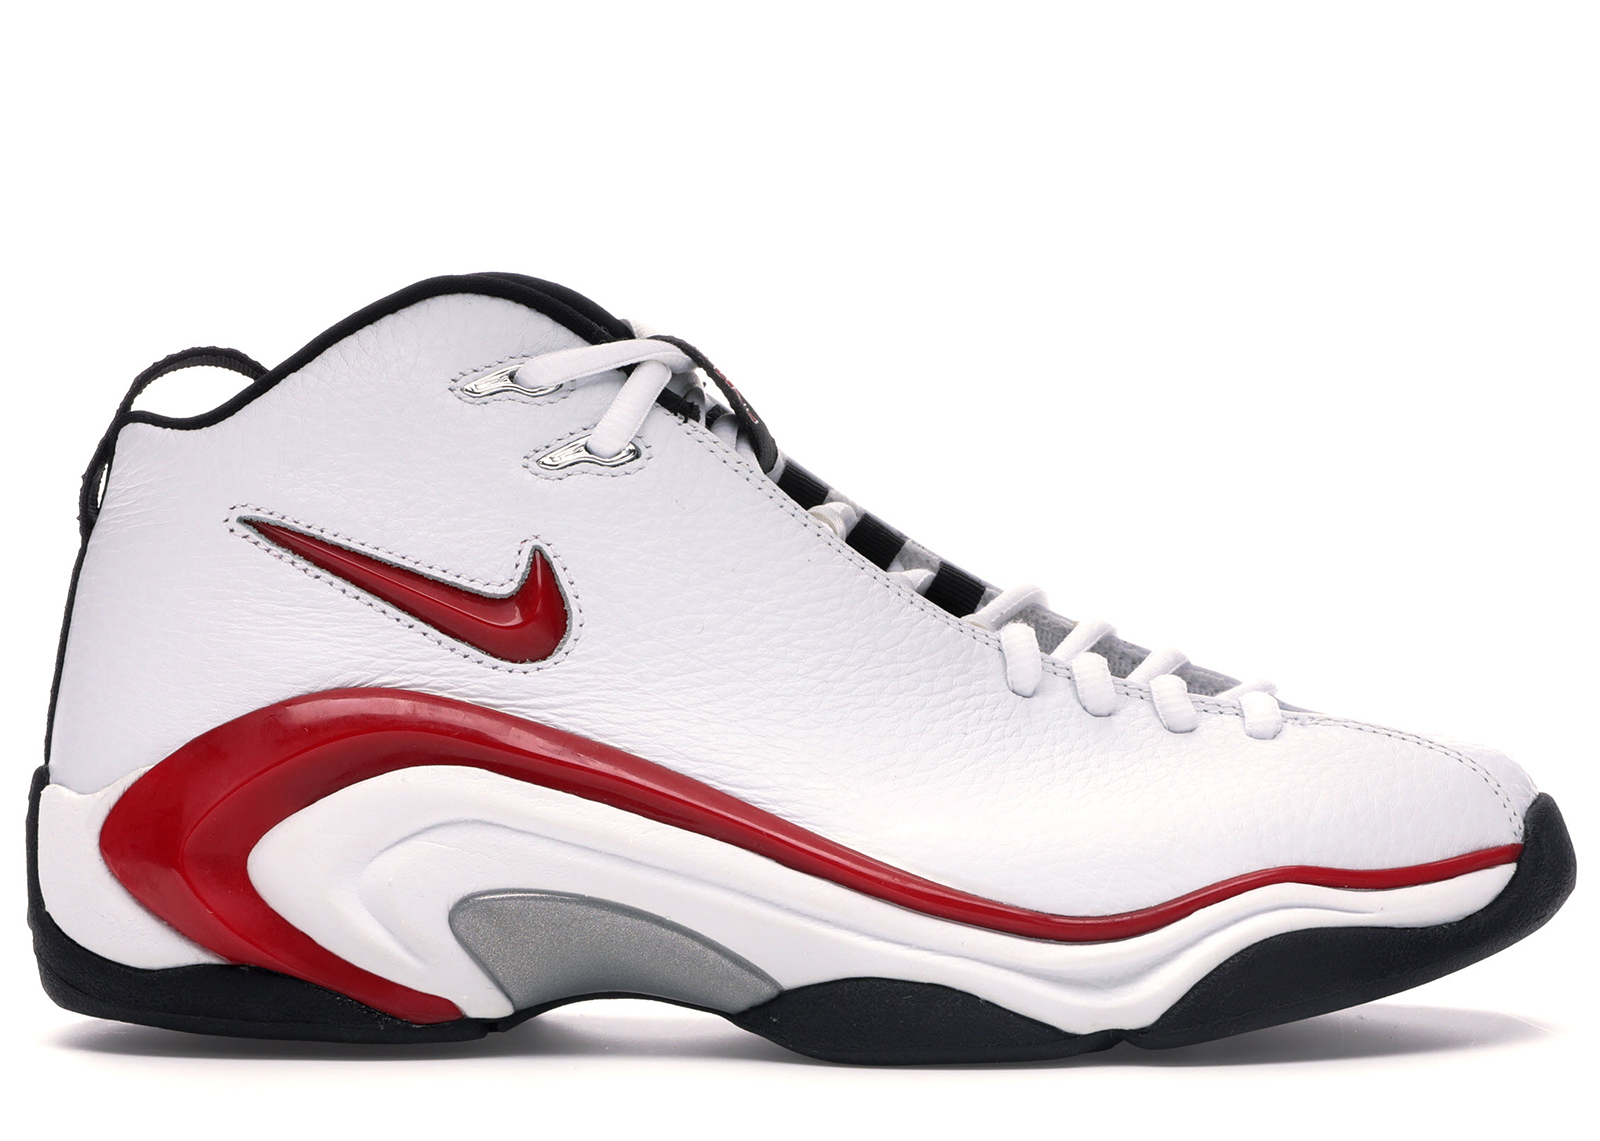 nike air pippen shoes